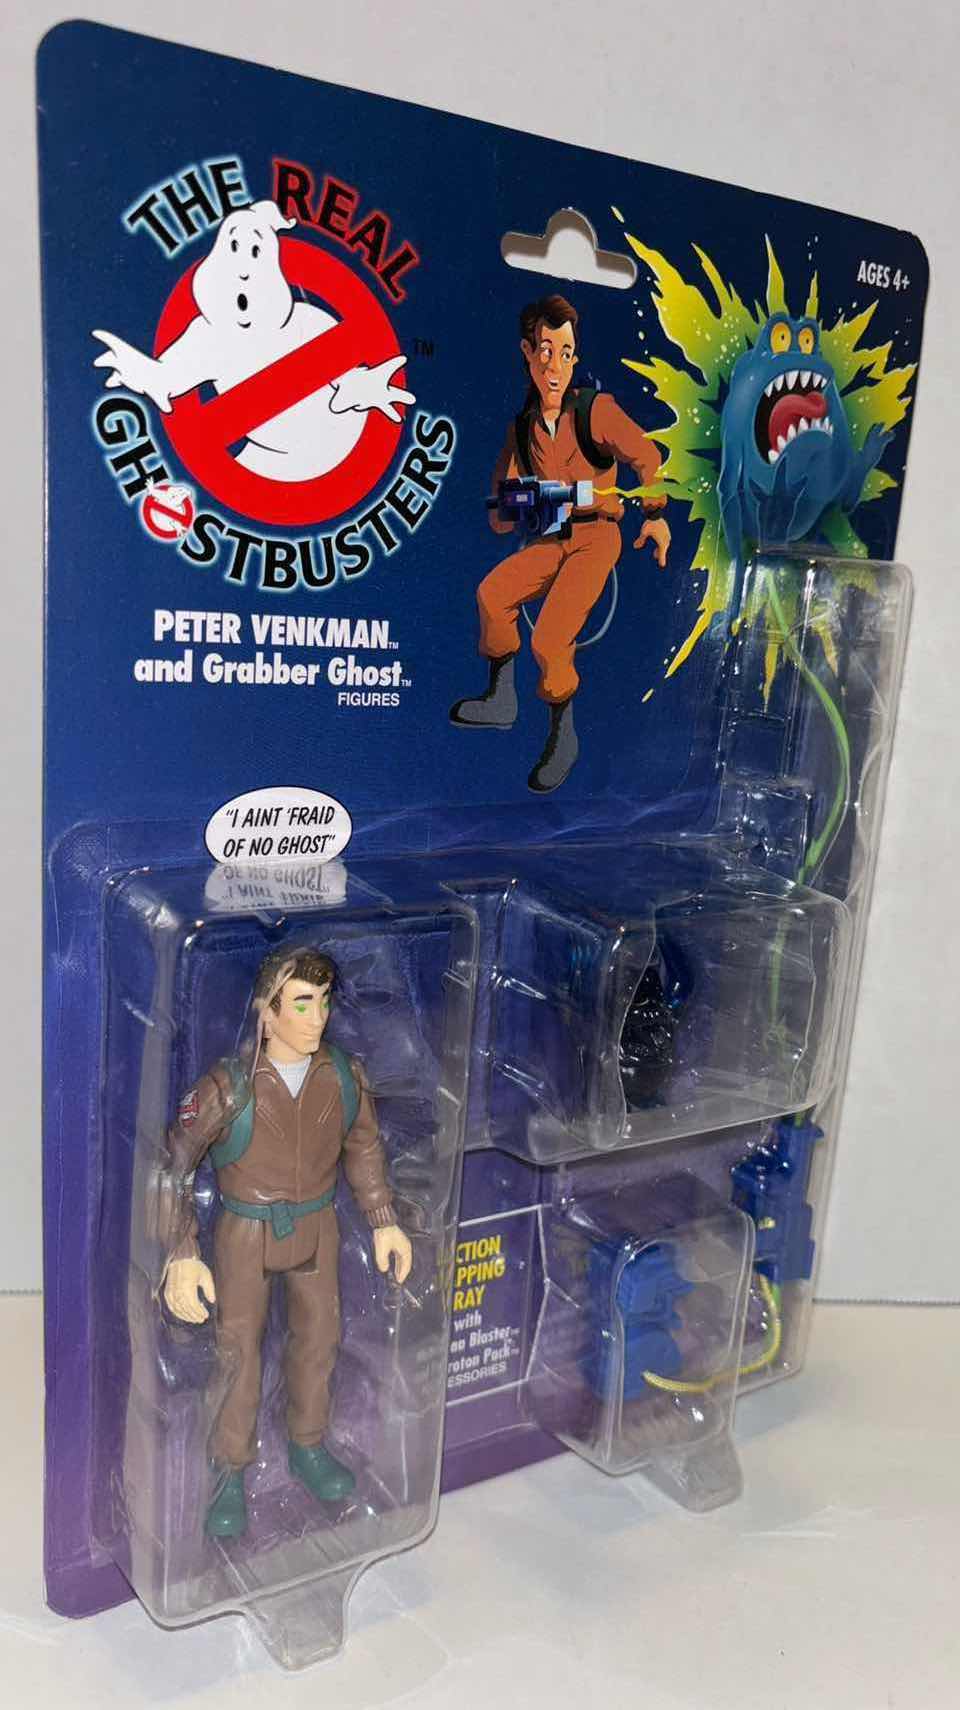 Photo 2 of NEW HASBRO KENNER THE REAL GHOSTBUSTERS ACTION FIGURE & ACCESSORIES 3-PACK, “PETER VENKMAN & GRABBER GHOST”, “WINSTON ZEDDEMORE & CHOMPER GHOST” x 2